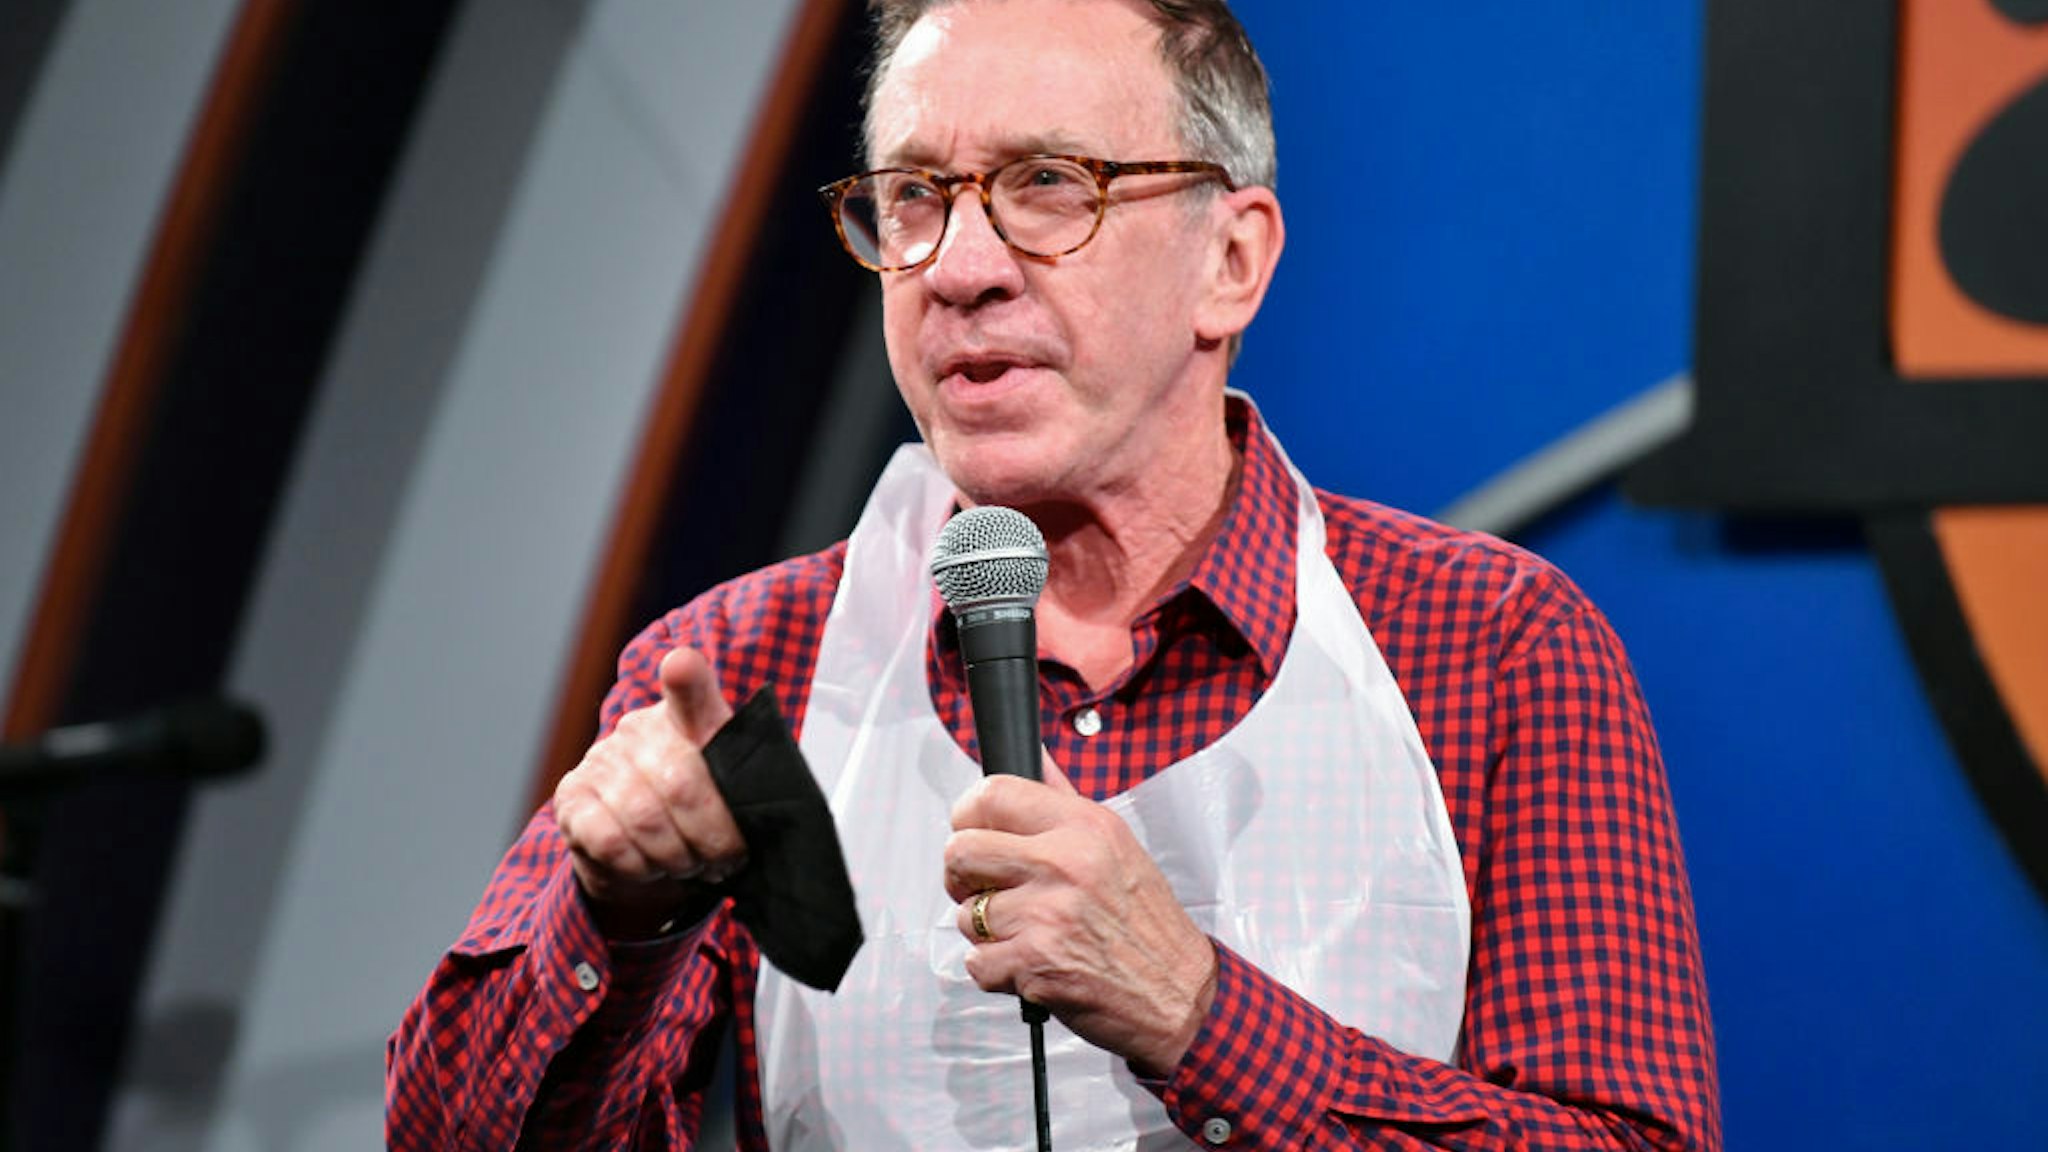 WEST HOLLYWOOD, CALIFORNIA - DECEMBER 25: Tim Allen performs at The Laugh Factory 42nd annual free Christmas dinner and show at The Laugh Factory on December 25, 2021 in West Hollywood, California. (Photo by Rodin Eckenroth/Getty Images)